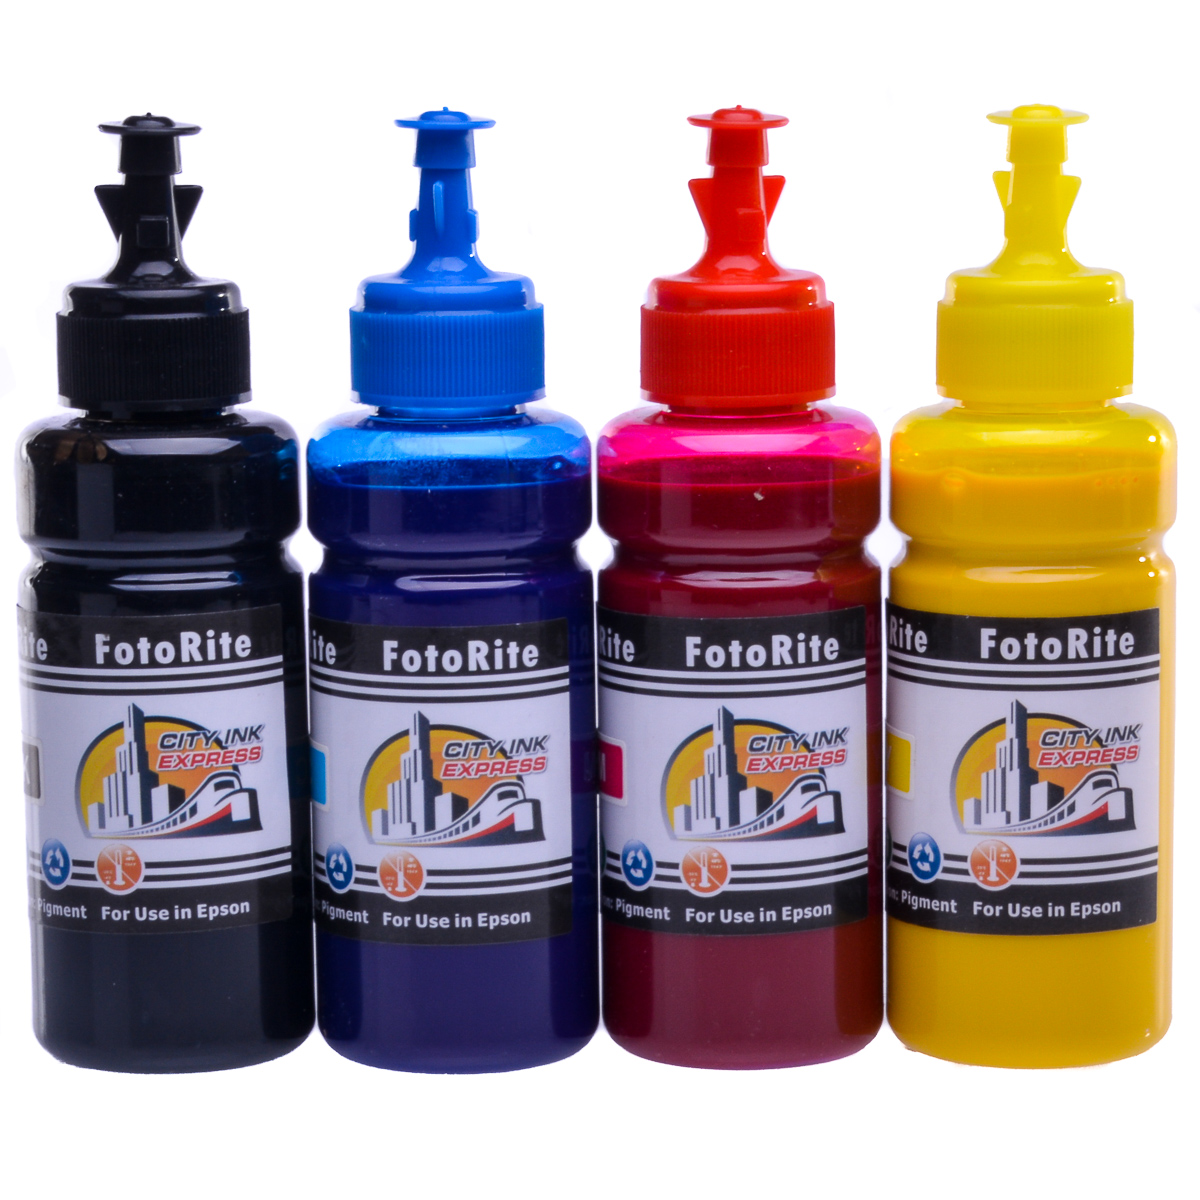 Cheap Multipack pigment ink refill replaces Epson XP-4150